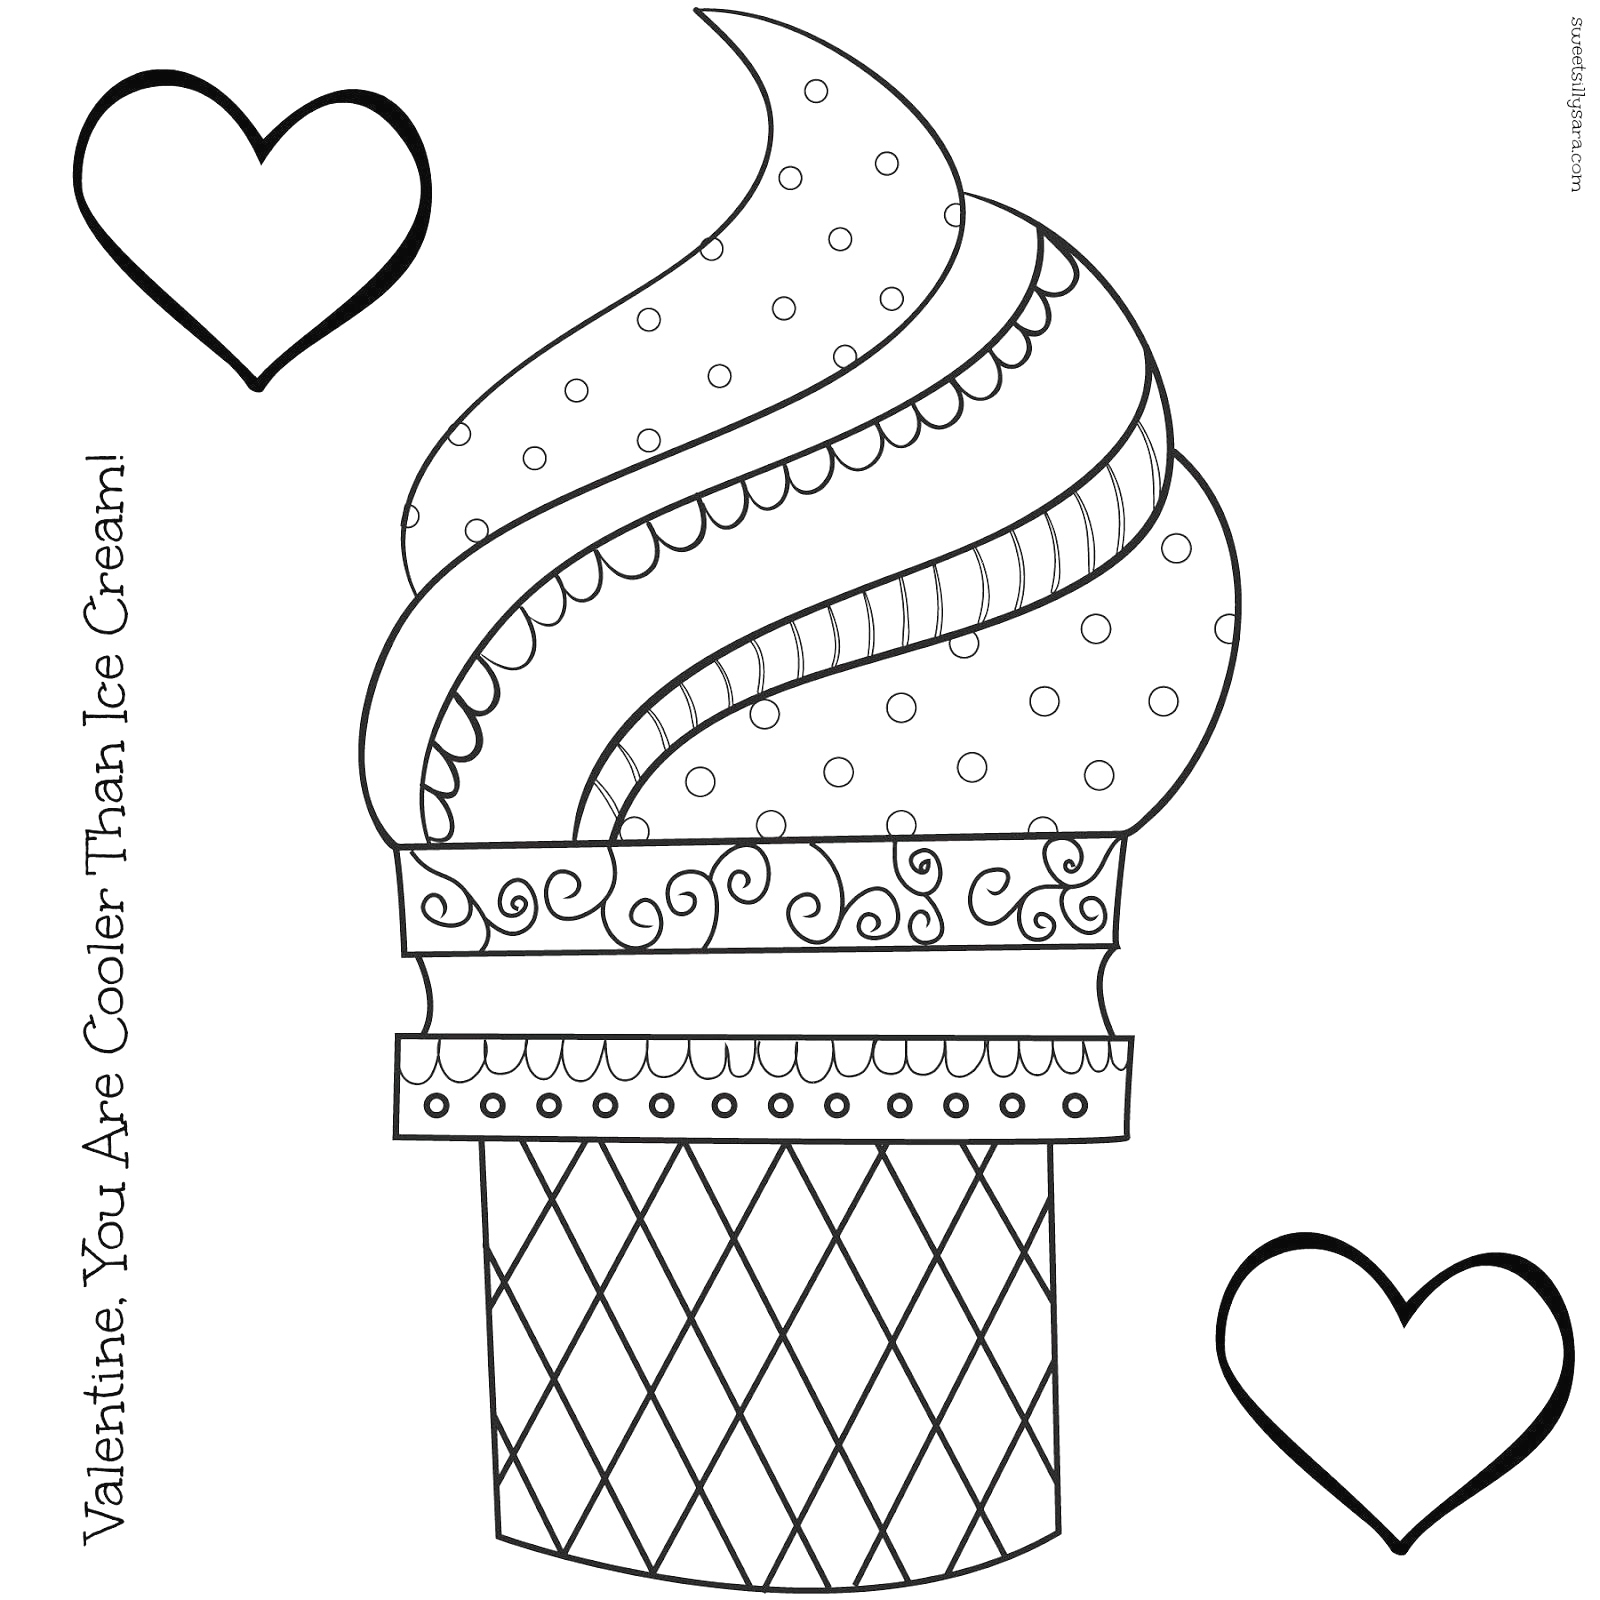 Banana Split Coloring Page Ice Cream Sundae Coloring Page 21260 736736 Coloriorinfo